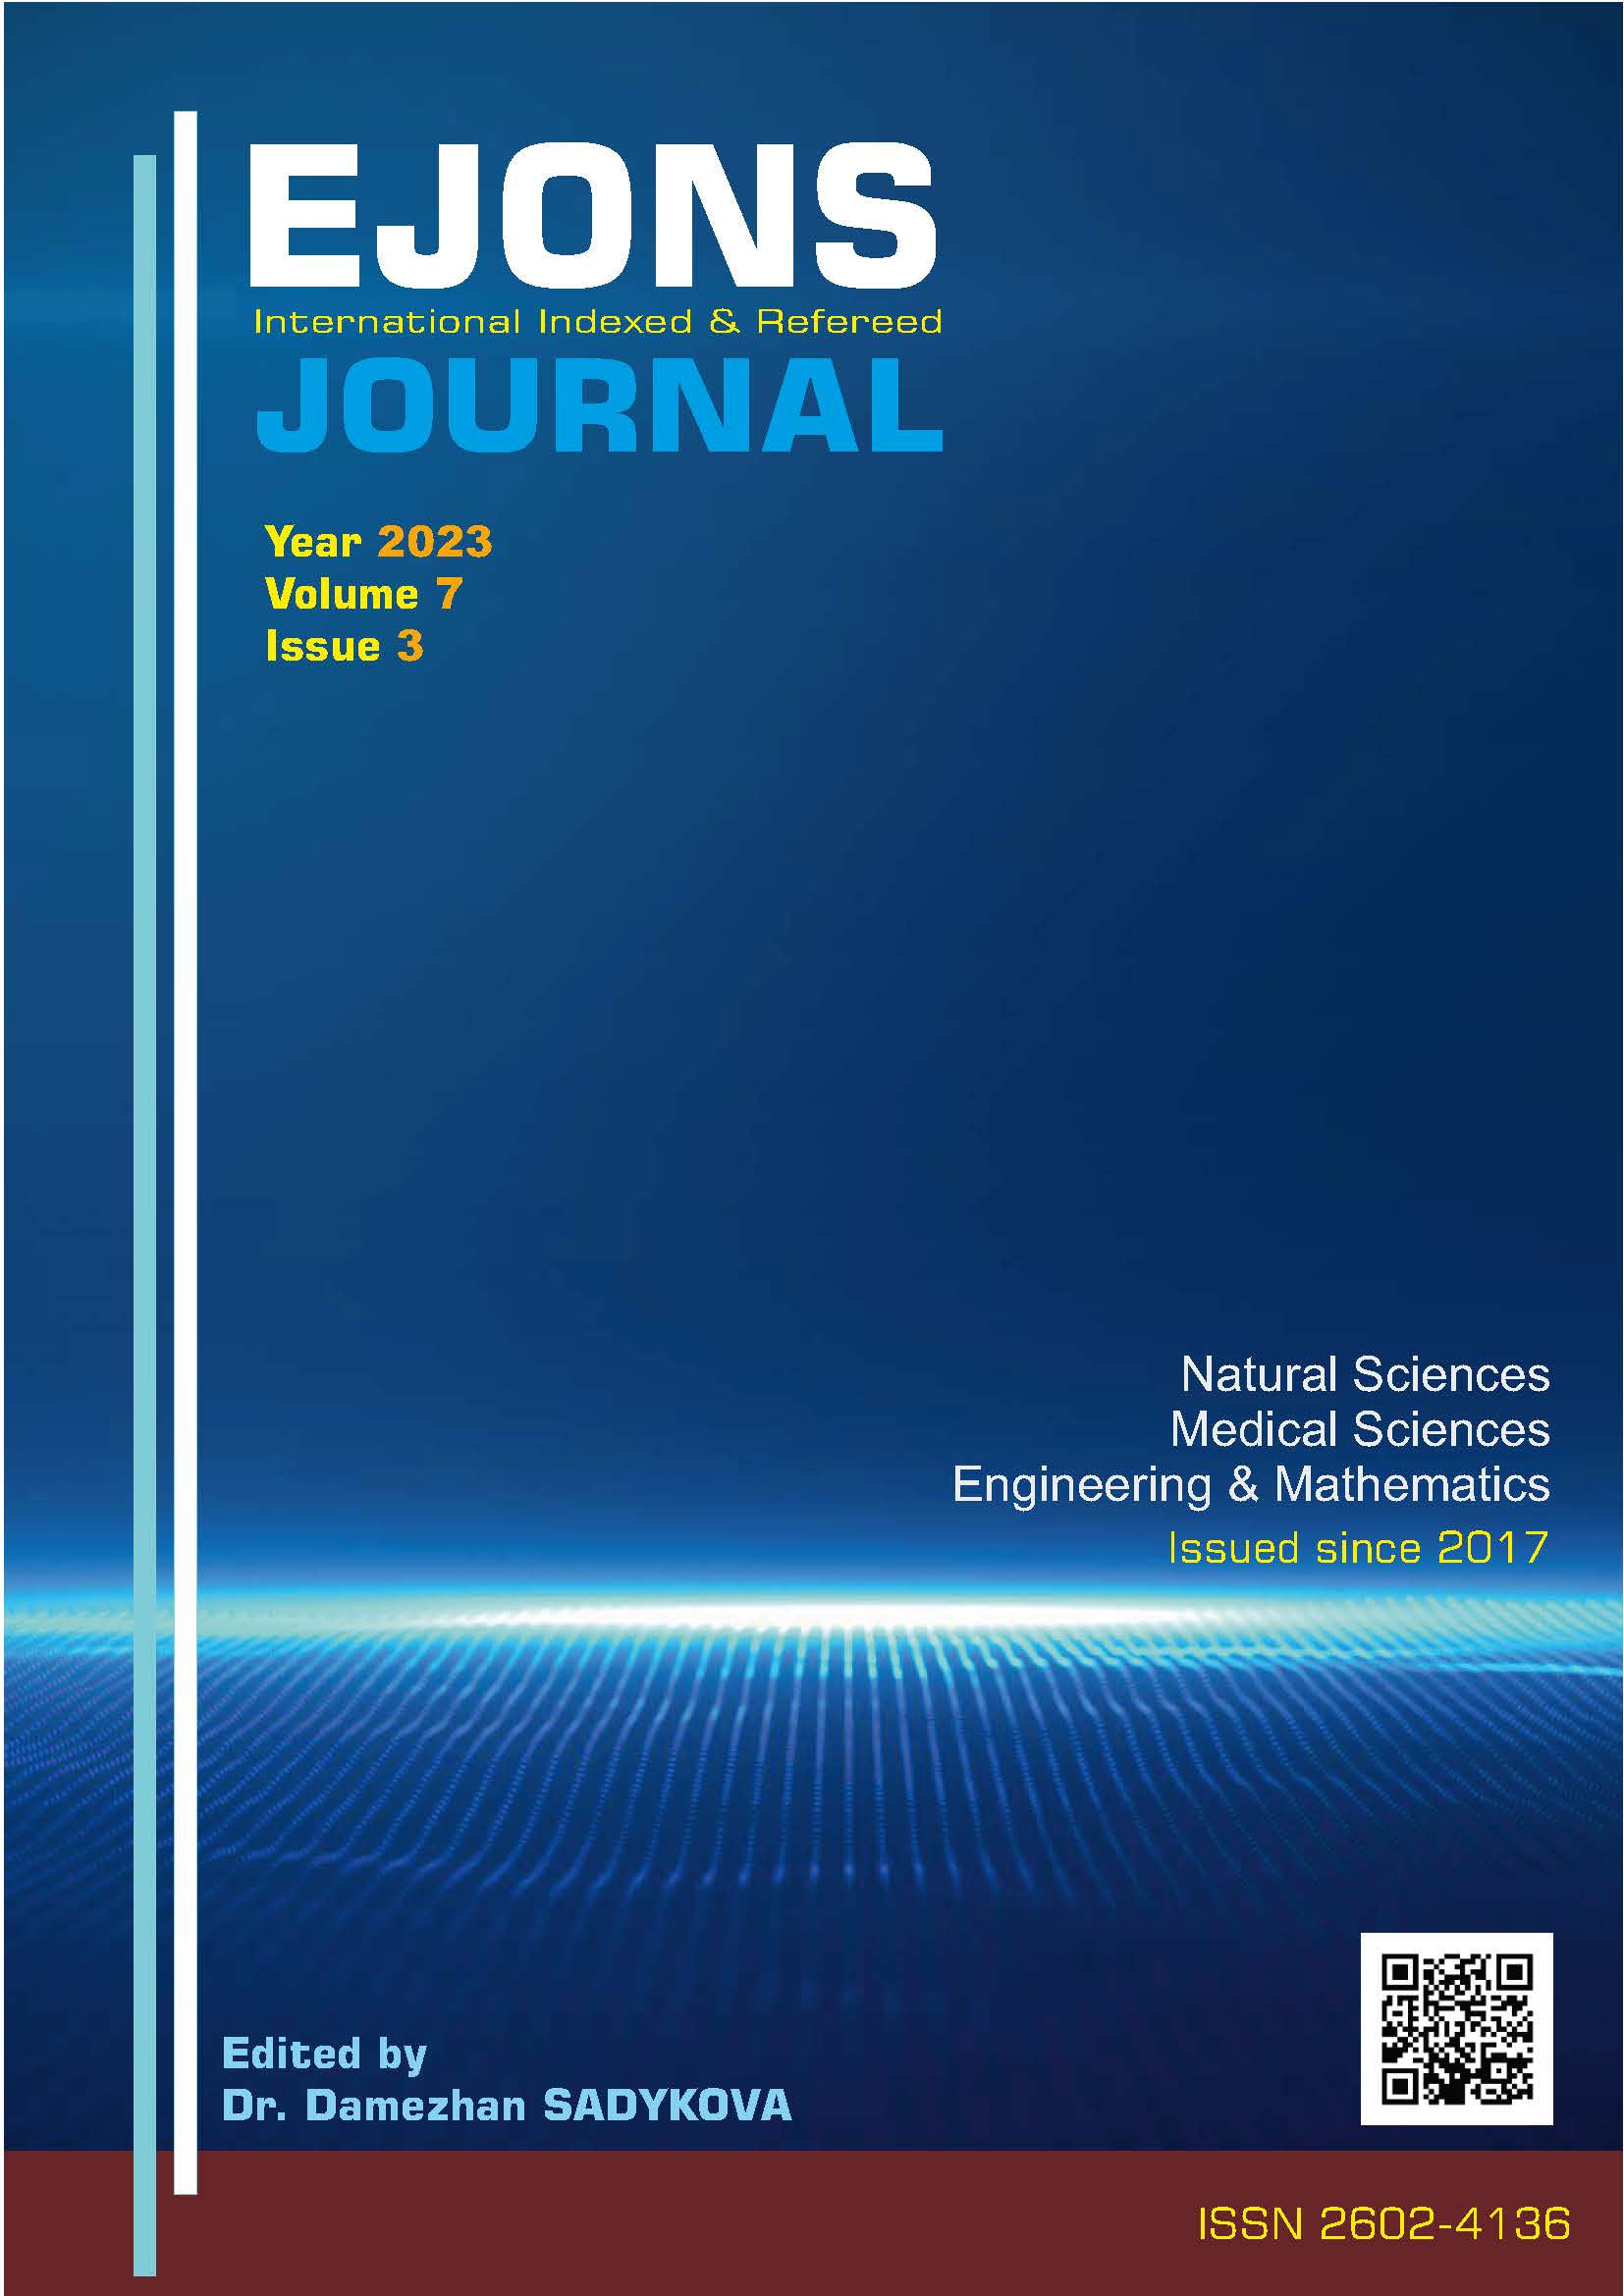 					View Vol. 7 No. 3 (2023): EJONS Journal Volume 7 Issue 3
				